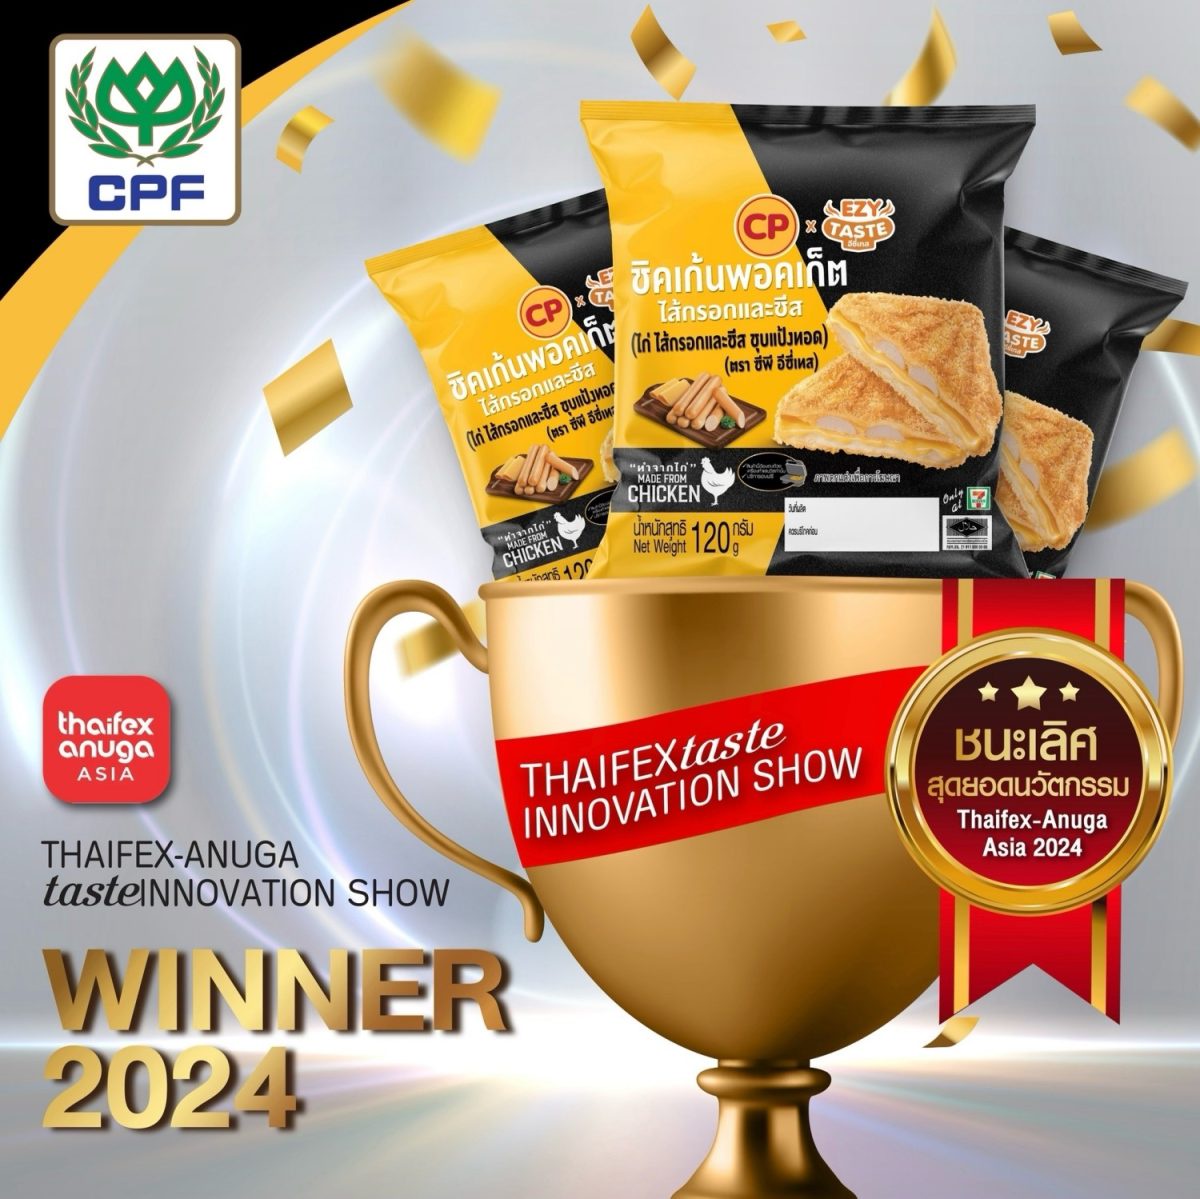 CP Foods Showcases Kitchen of the World with Sustainovation at THAIFEX - Anuga Asia 2024